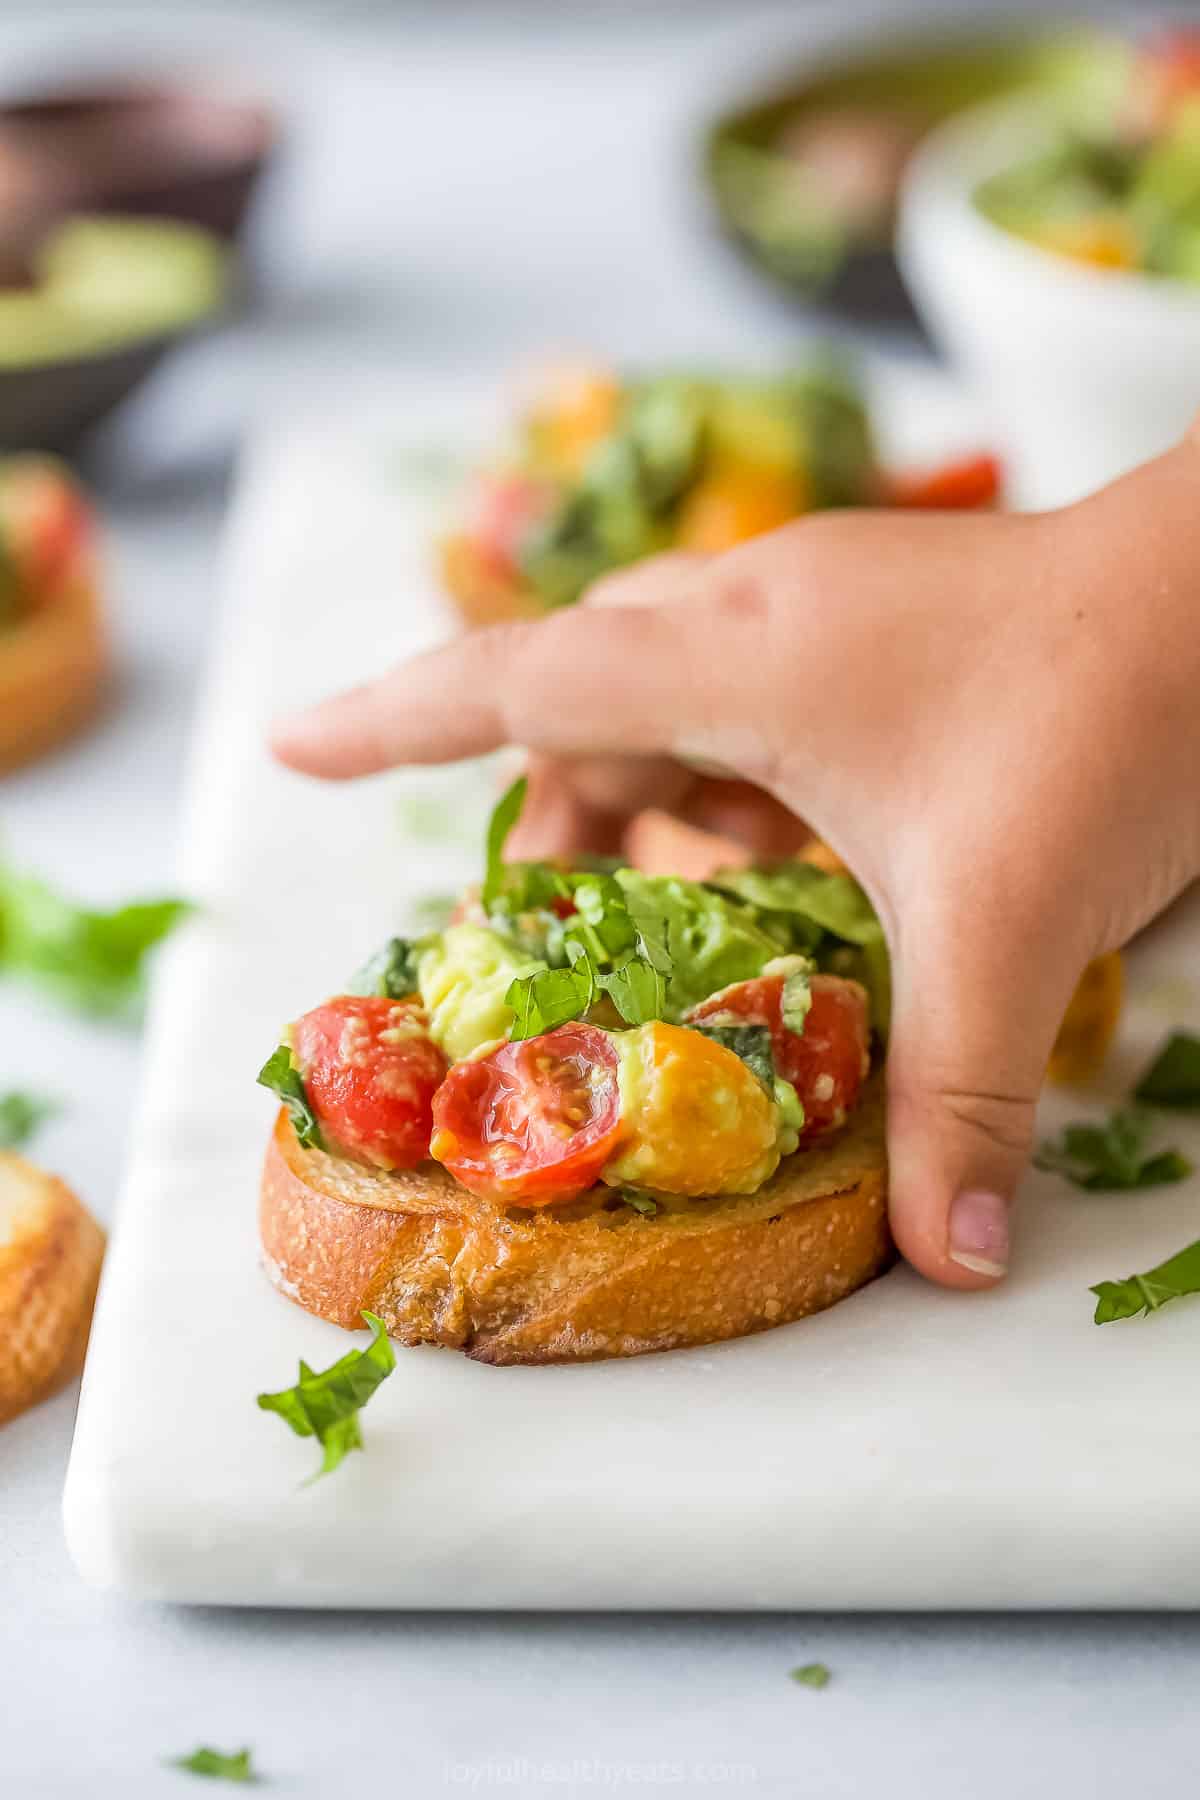 A slice of avocado bruschetta on a cutting board with a hand in the process of grabbing it